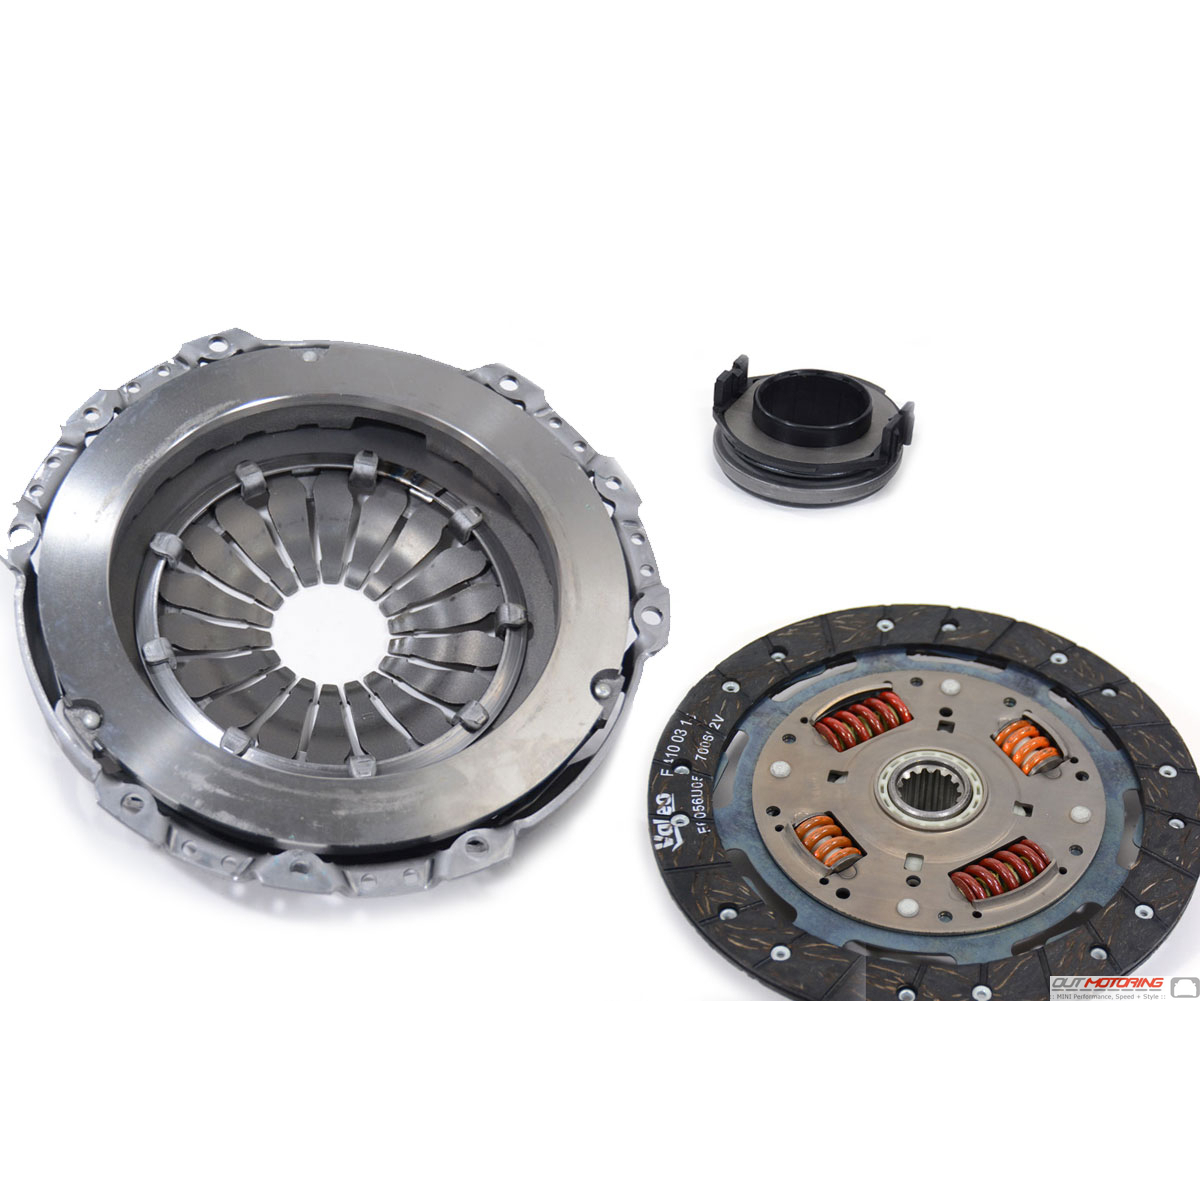 Valeo 52125201 OE Replacement Clutch Kit 